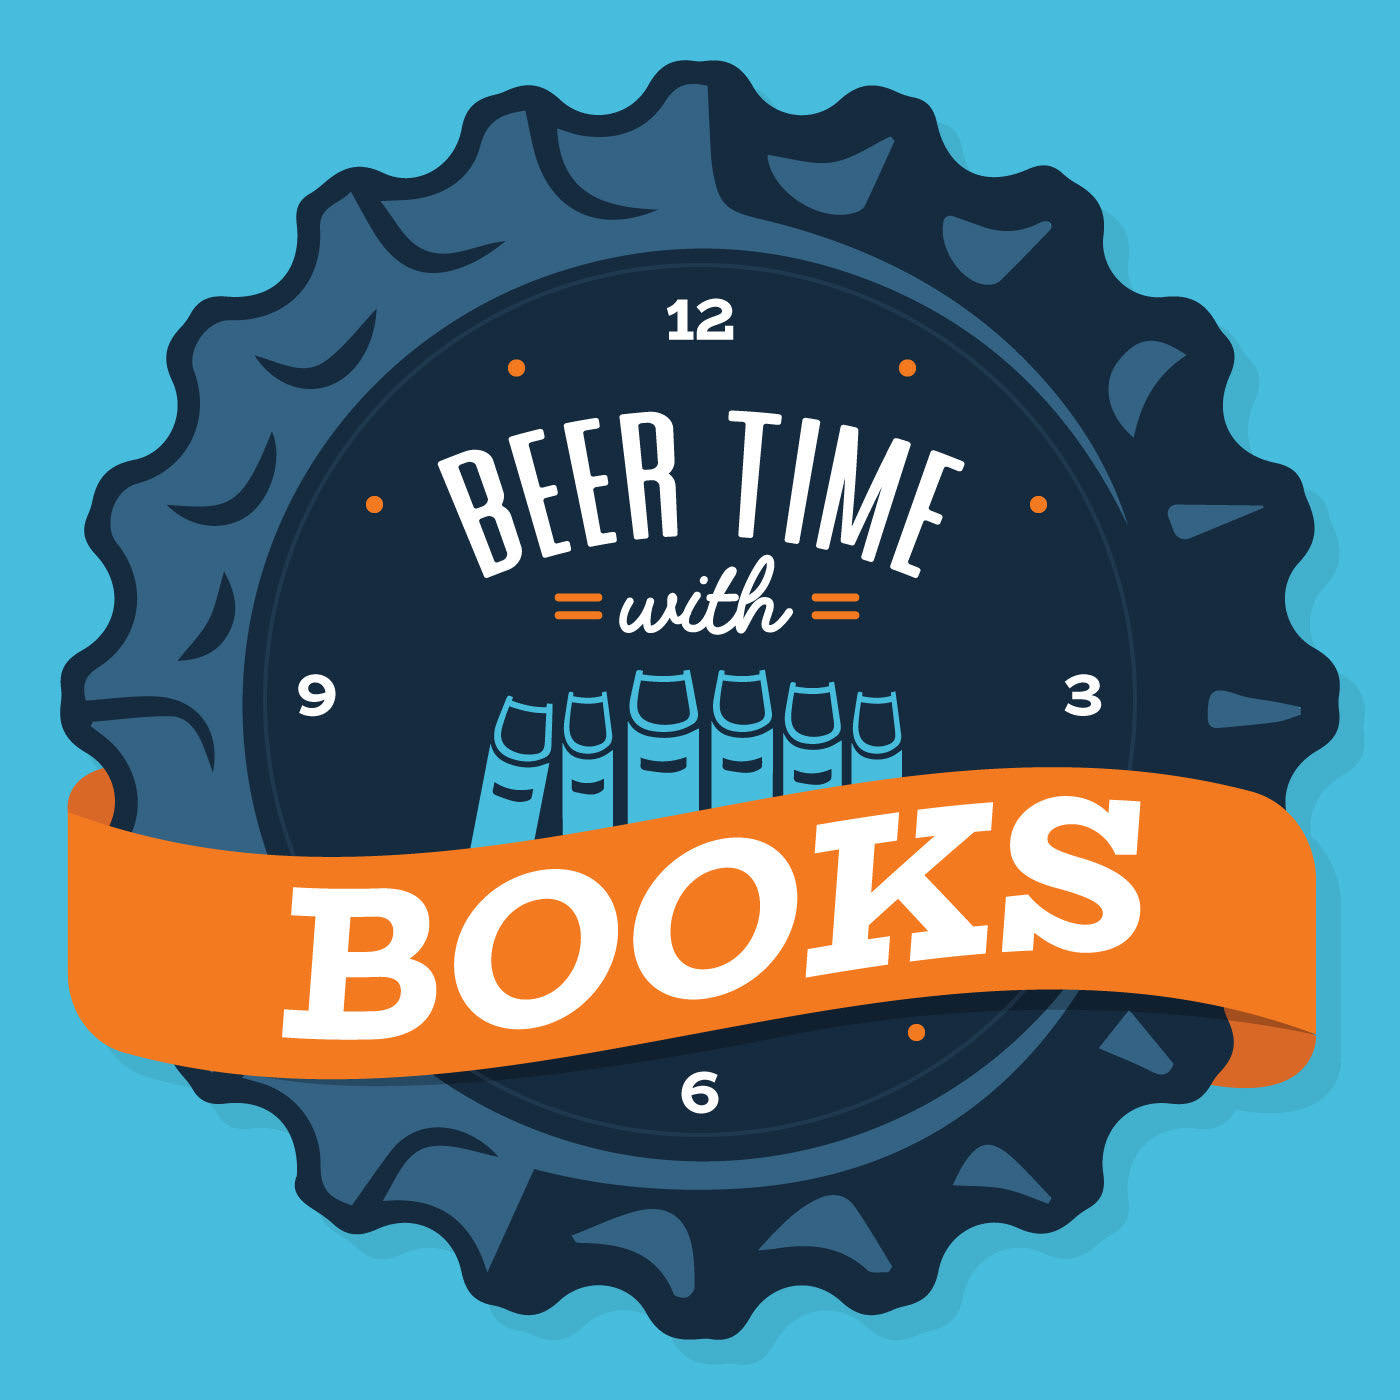 Beer Time with Books